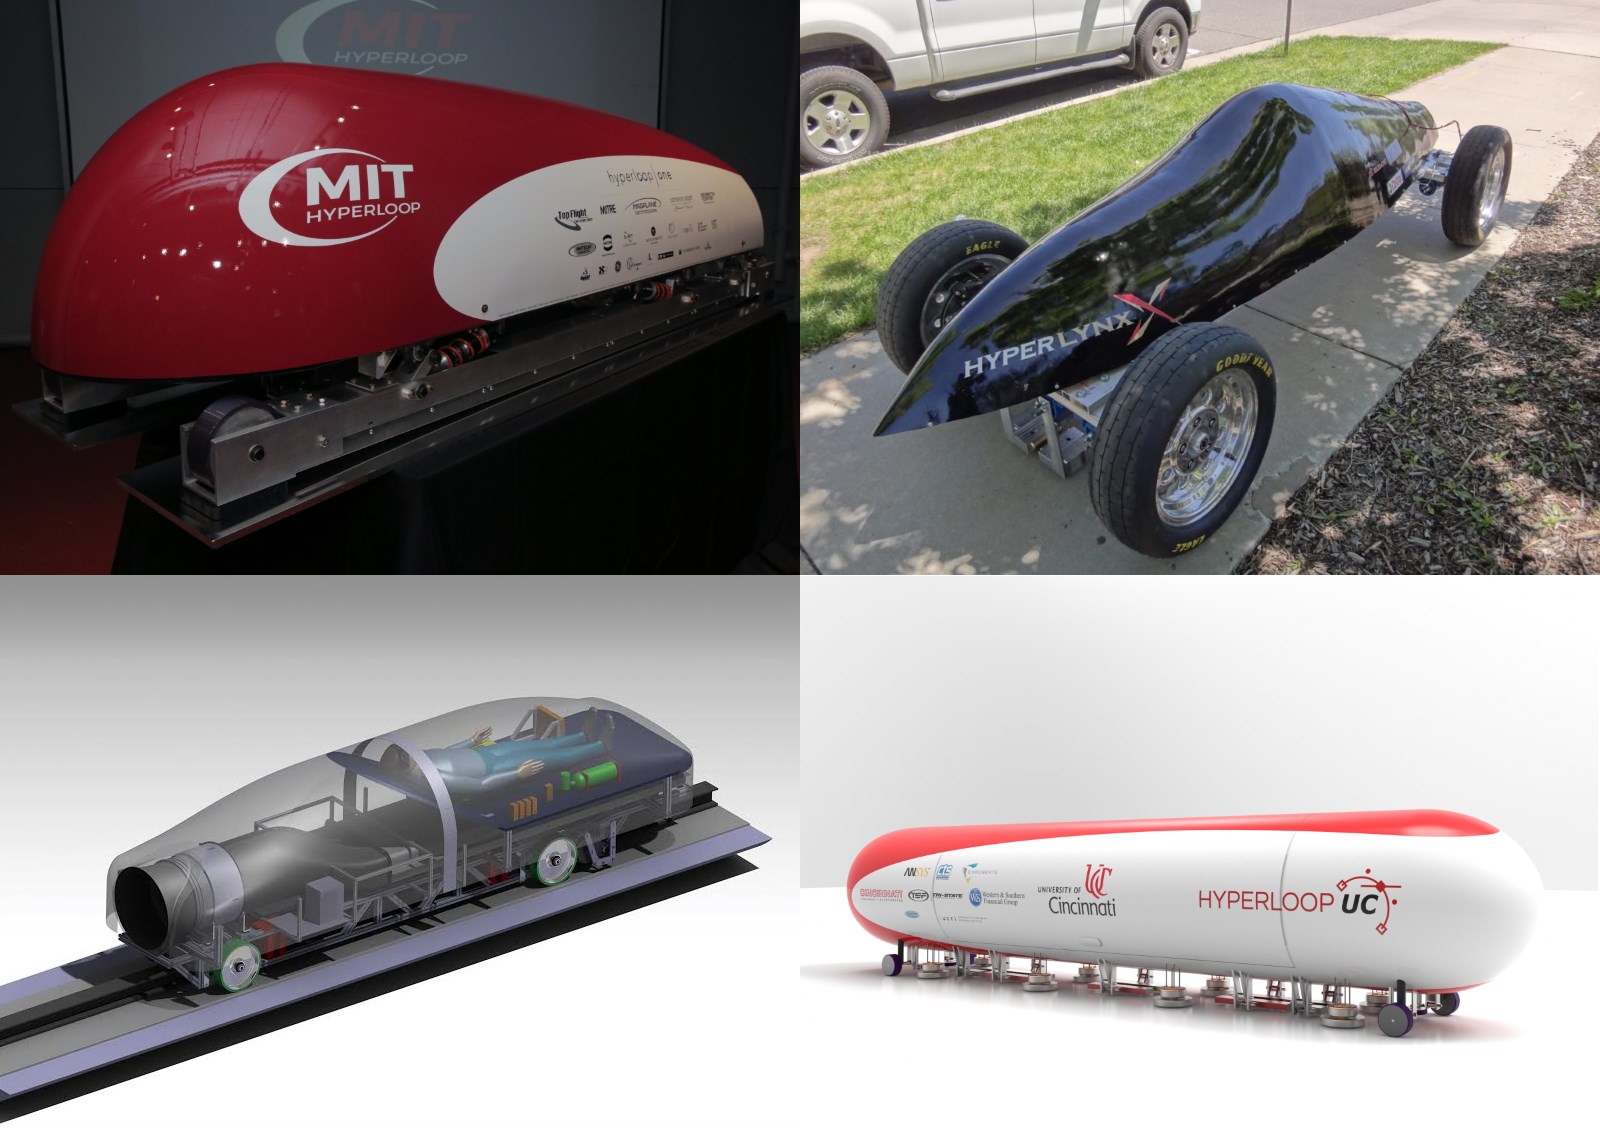 MIT's Hyperloop pod design from SpaceX's recent university competition.